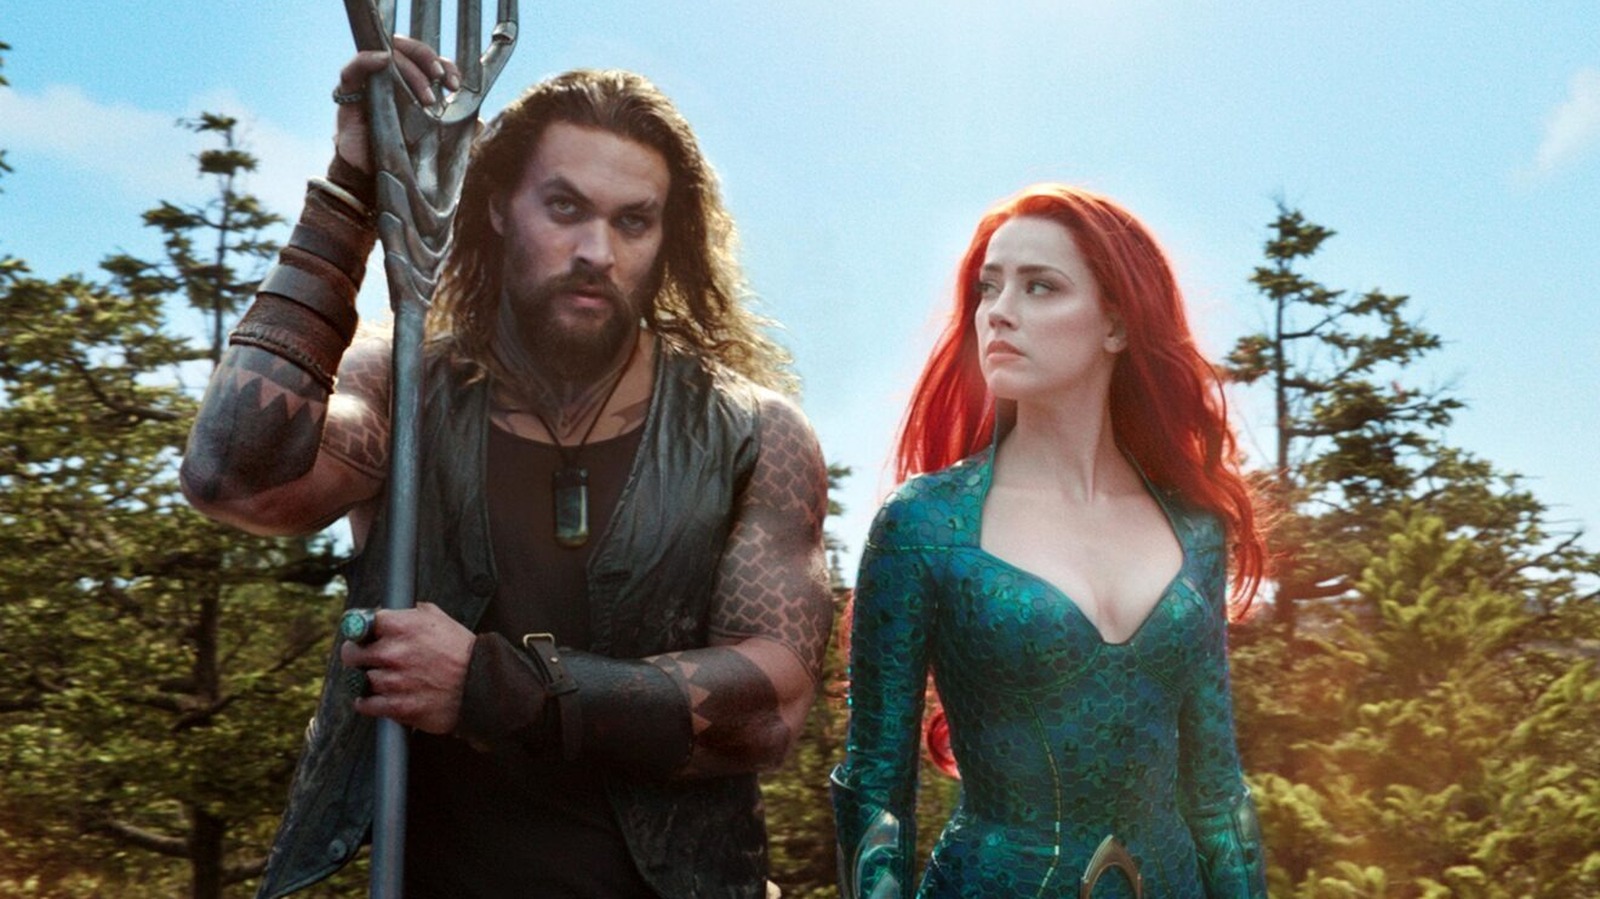 Aquaman 2: Will Mera's Blonde Hair Be a Plot Point? - wide 6